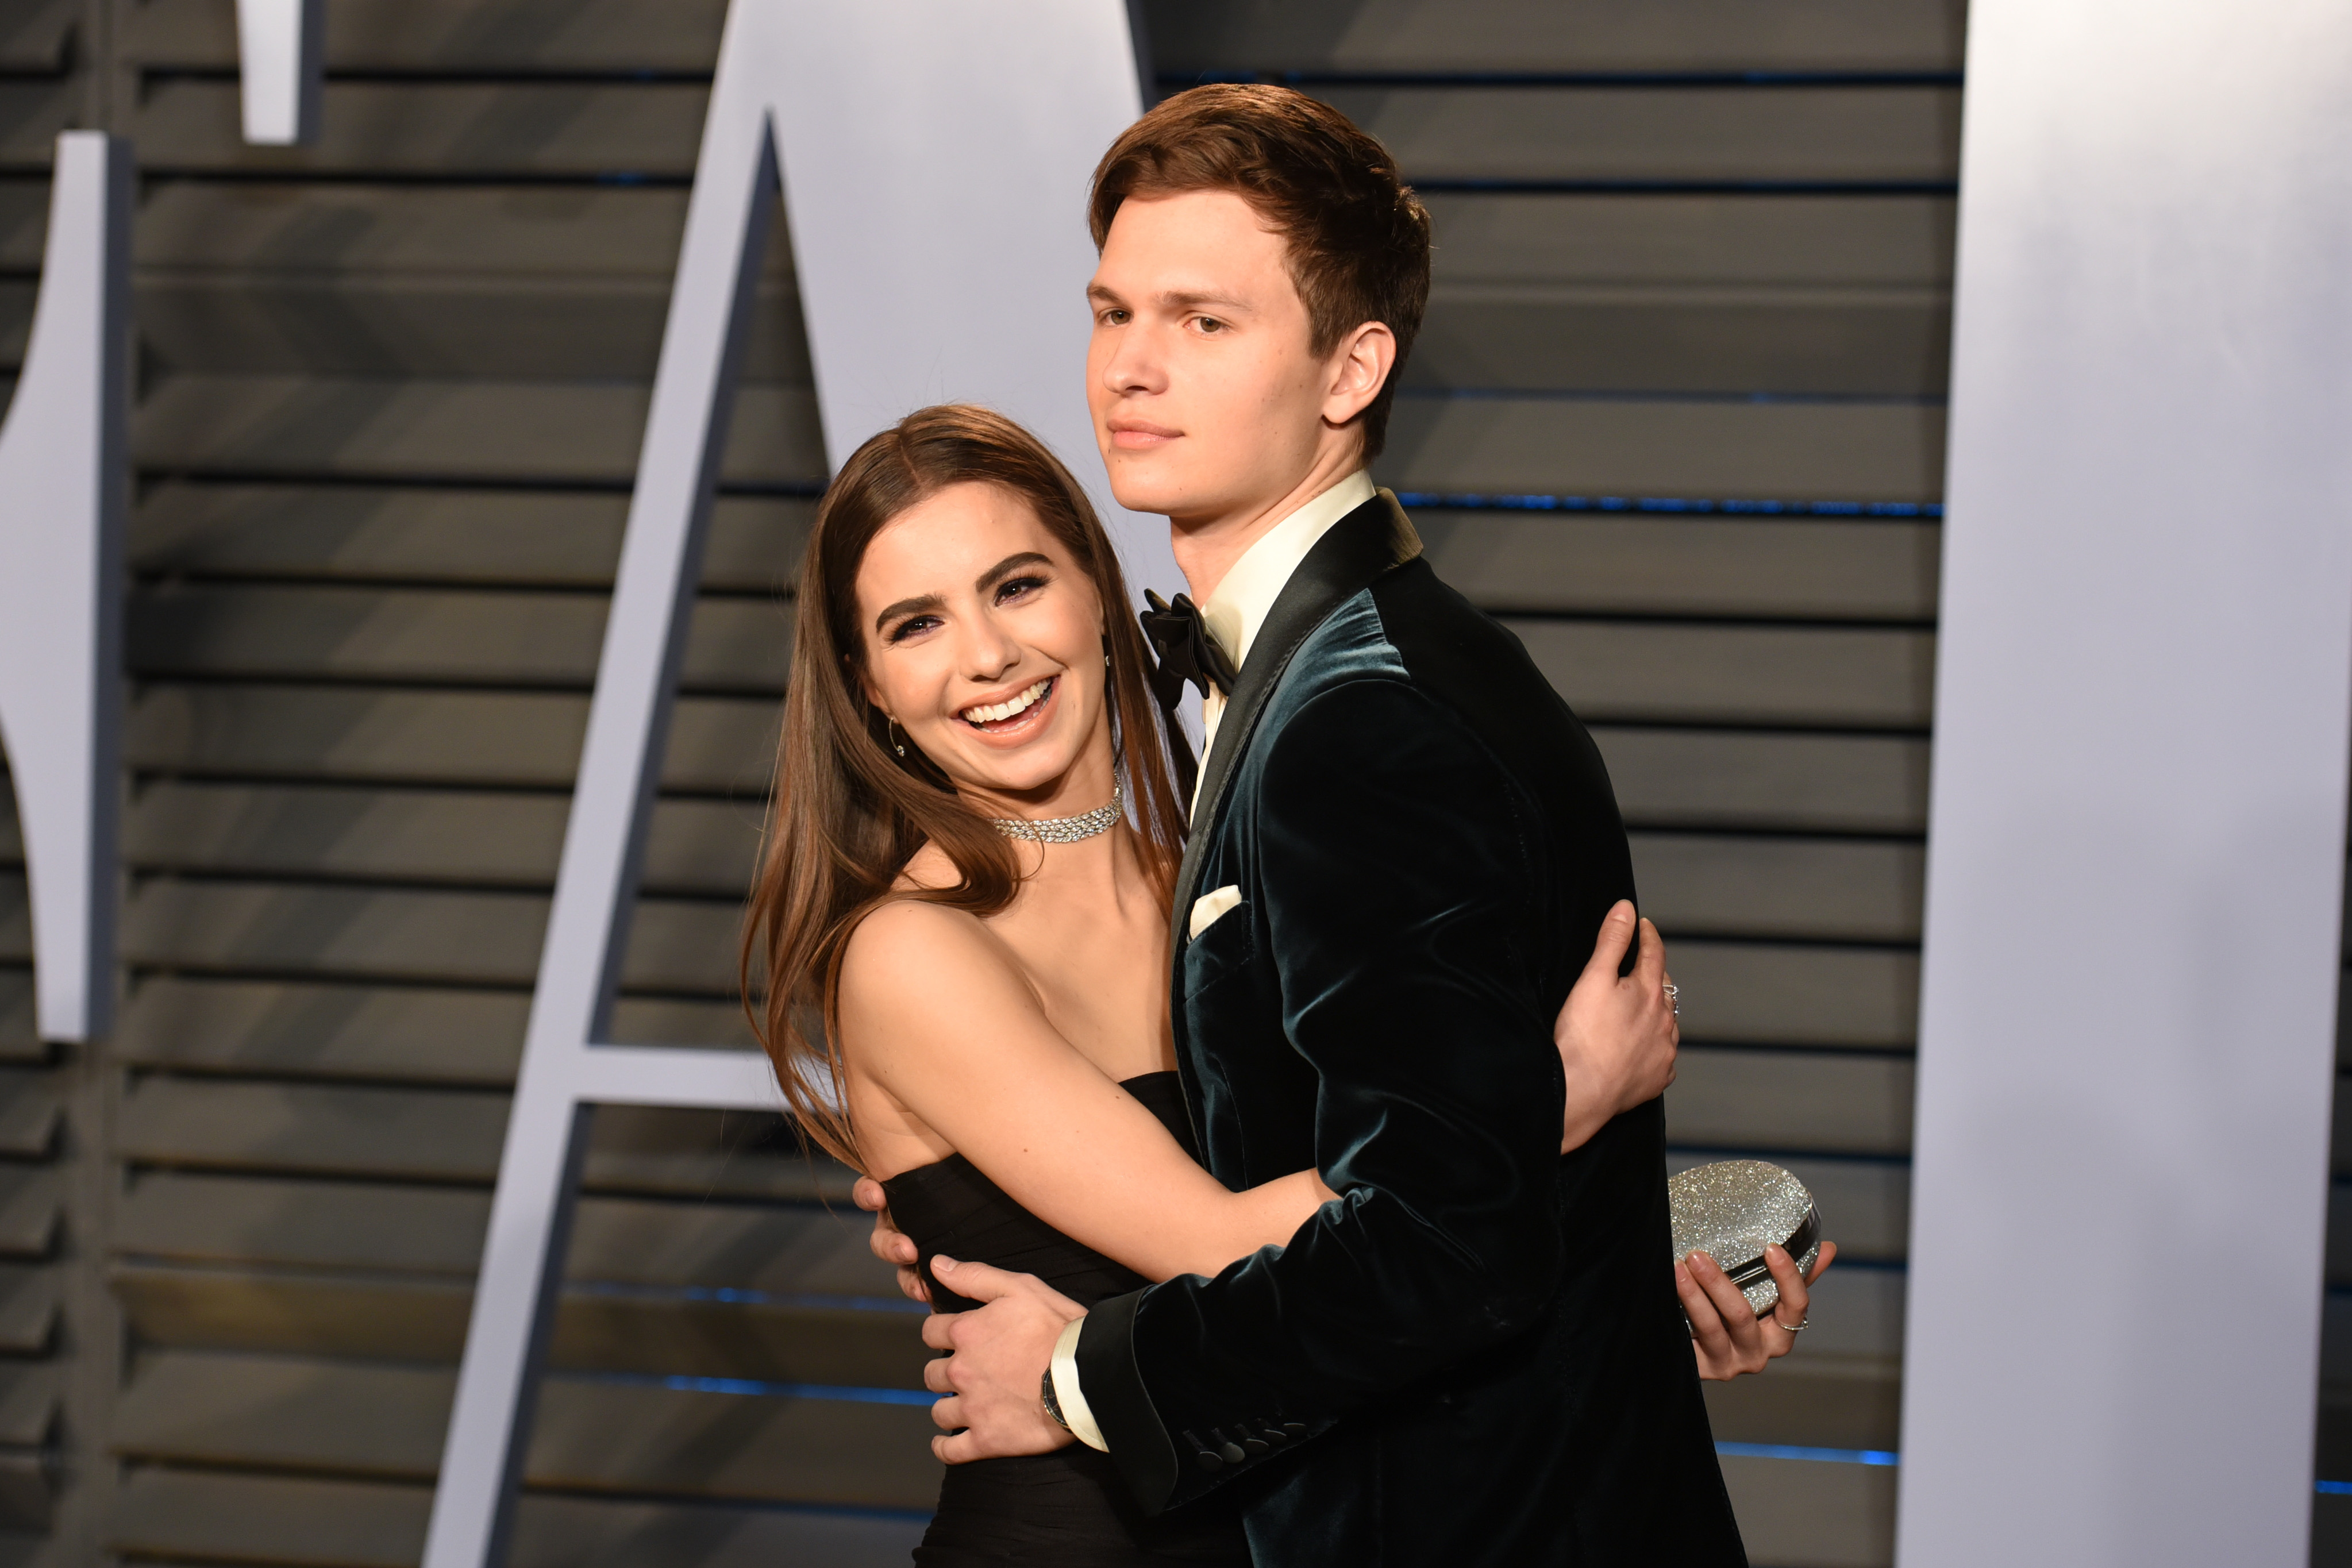 Ansel Elgort Wants To Fall In Love With Someone Other Than His GF, Which Sucks For Her